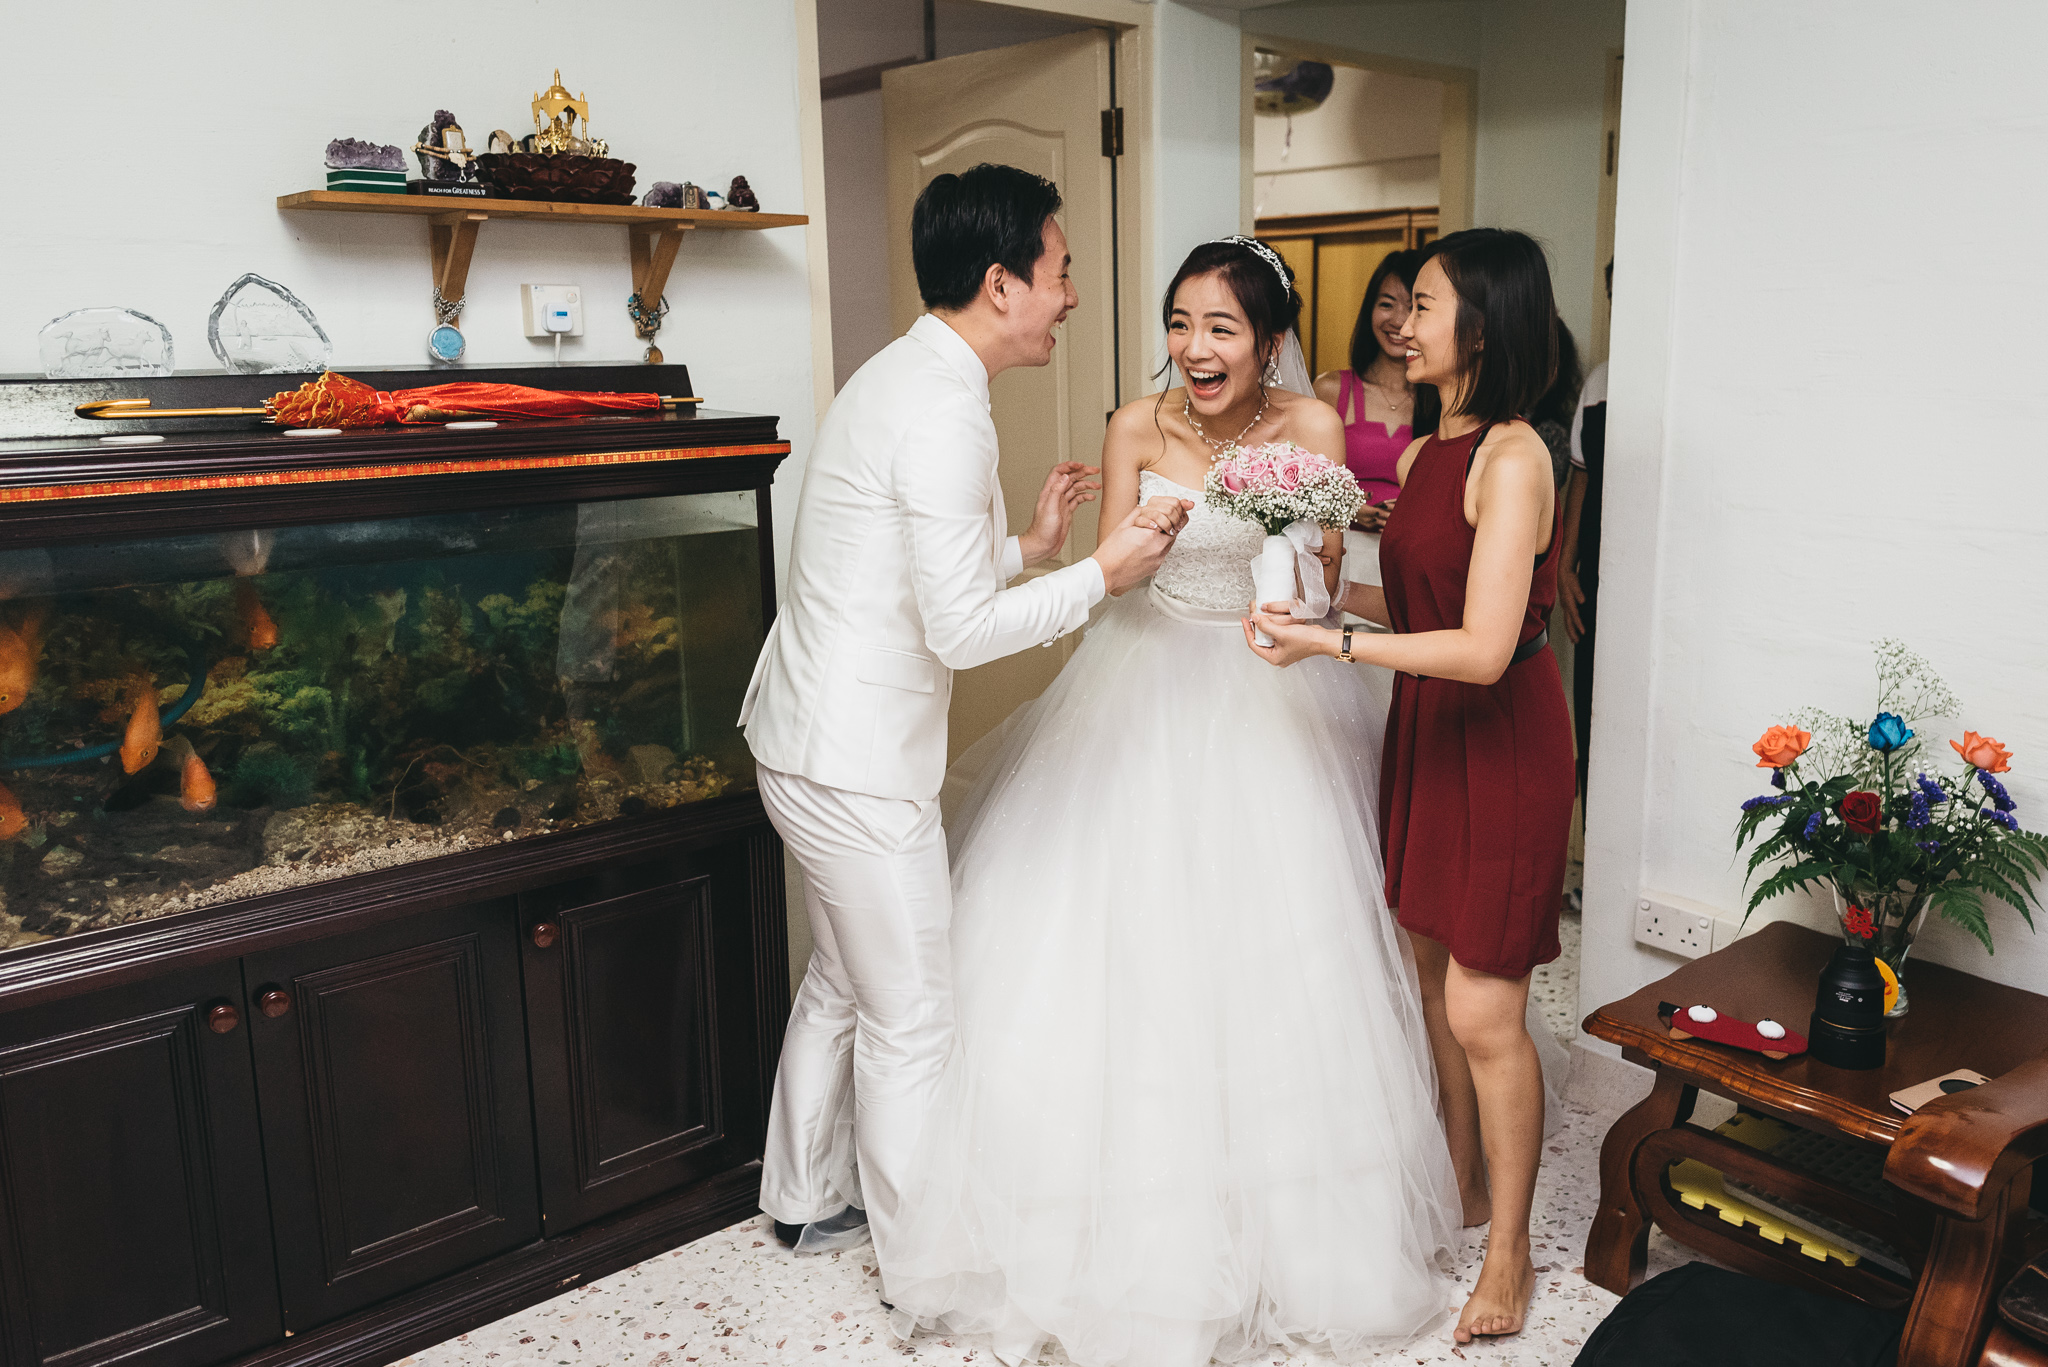 Fiona & Terence Wedding Day Highlights (resized for sharing) - 116.jpg